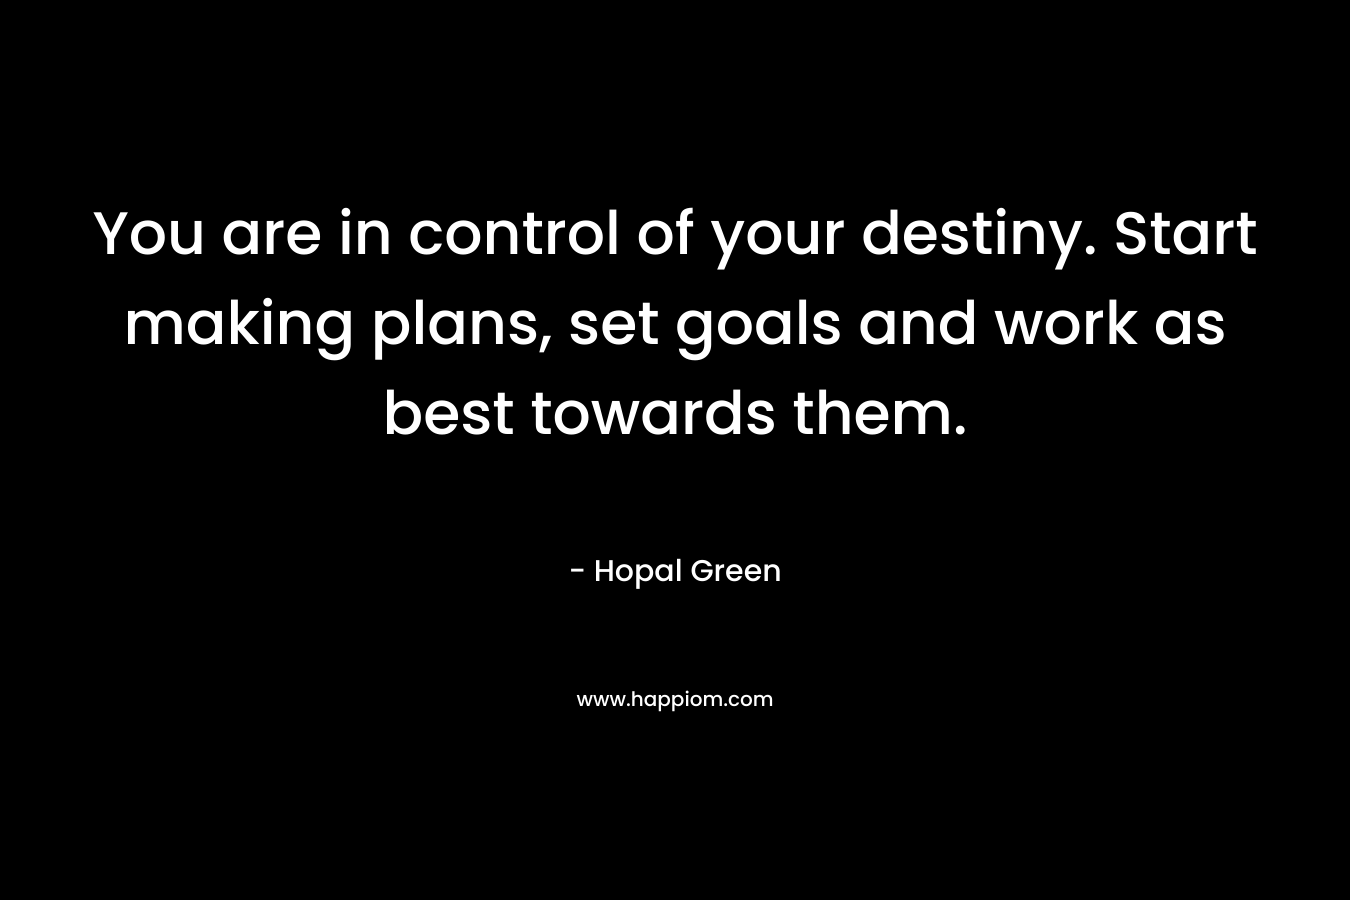 You are in control of your destiny. Start making plans, set goals and work as best towards them.